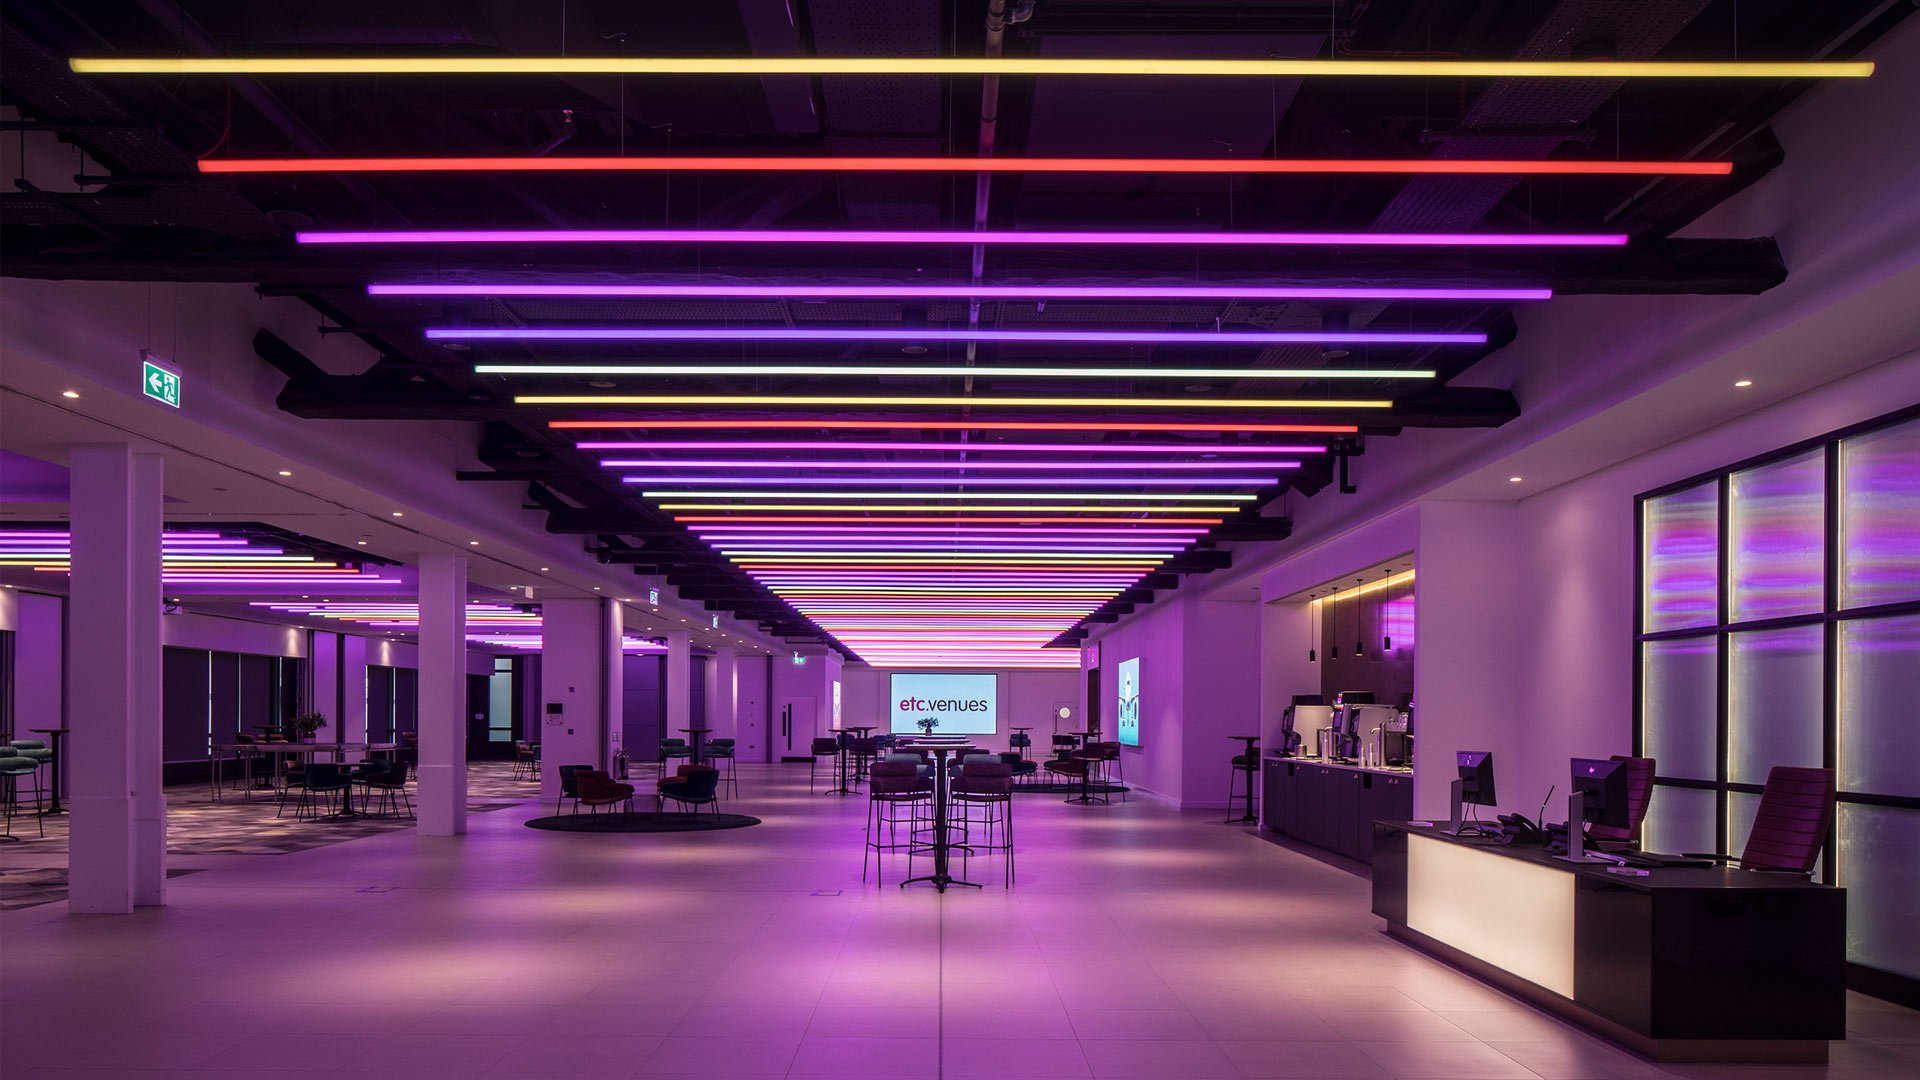 Etc Venues Bishopsgate Event Lighting Breakout Space Flexible Coloured Linear Profiles Architectural Lighting Design Consultants Nulty